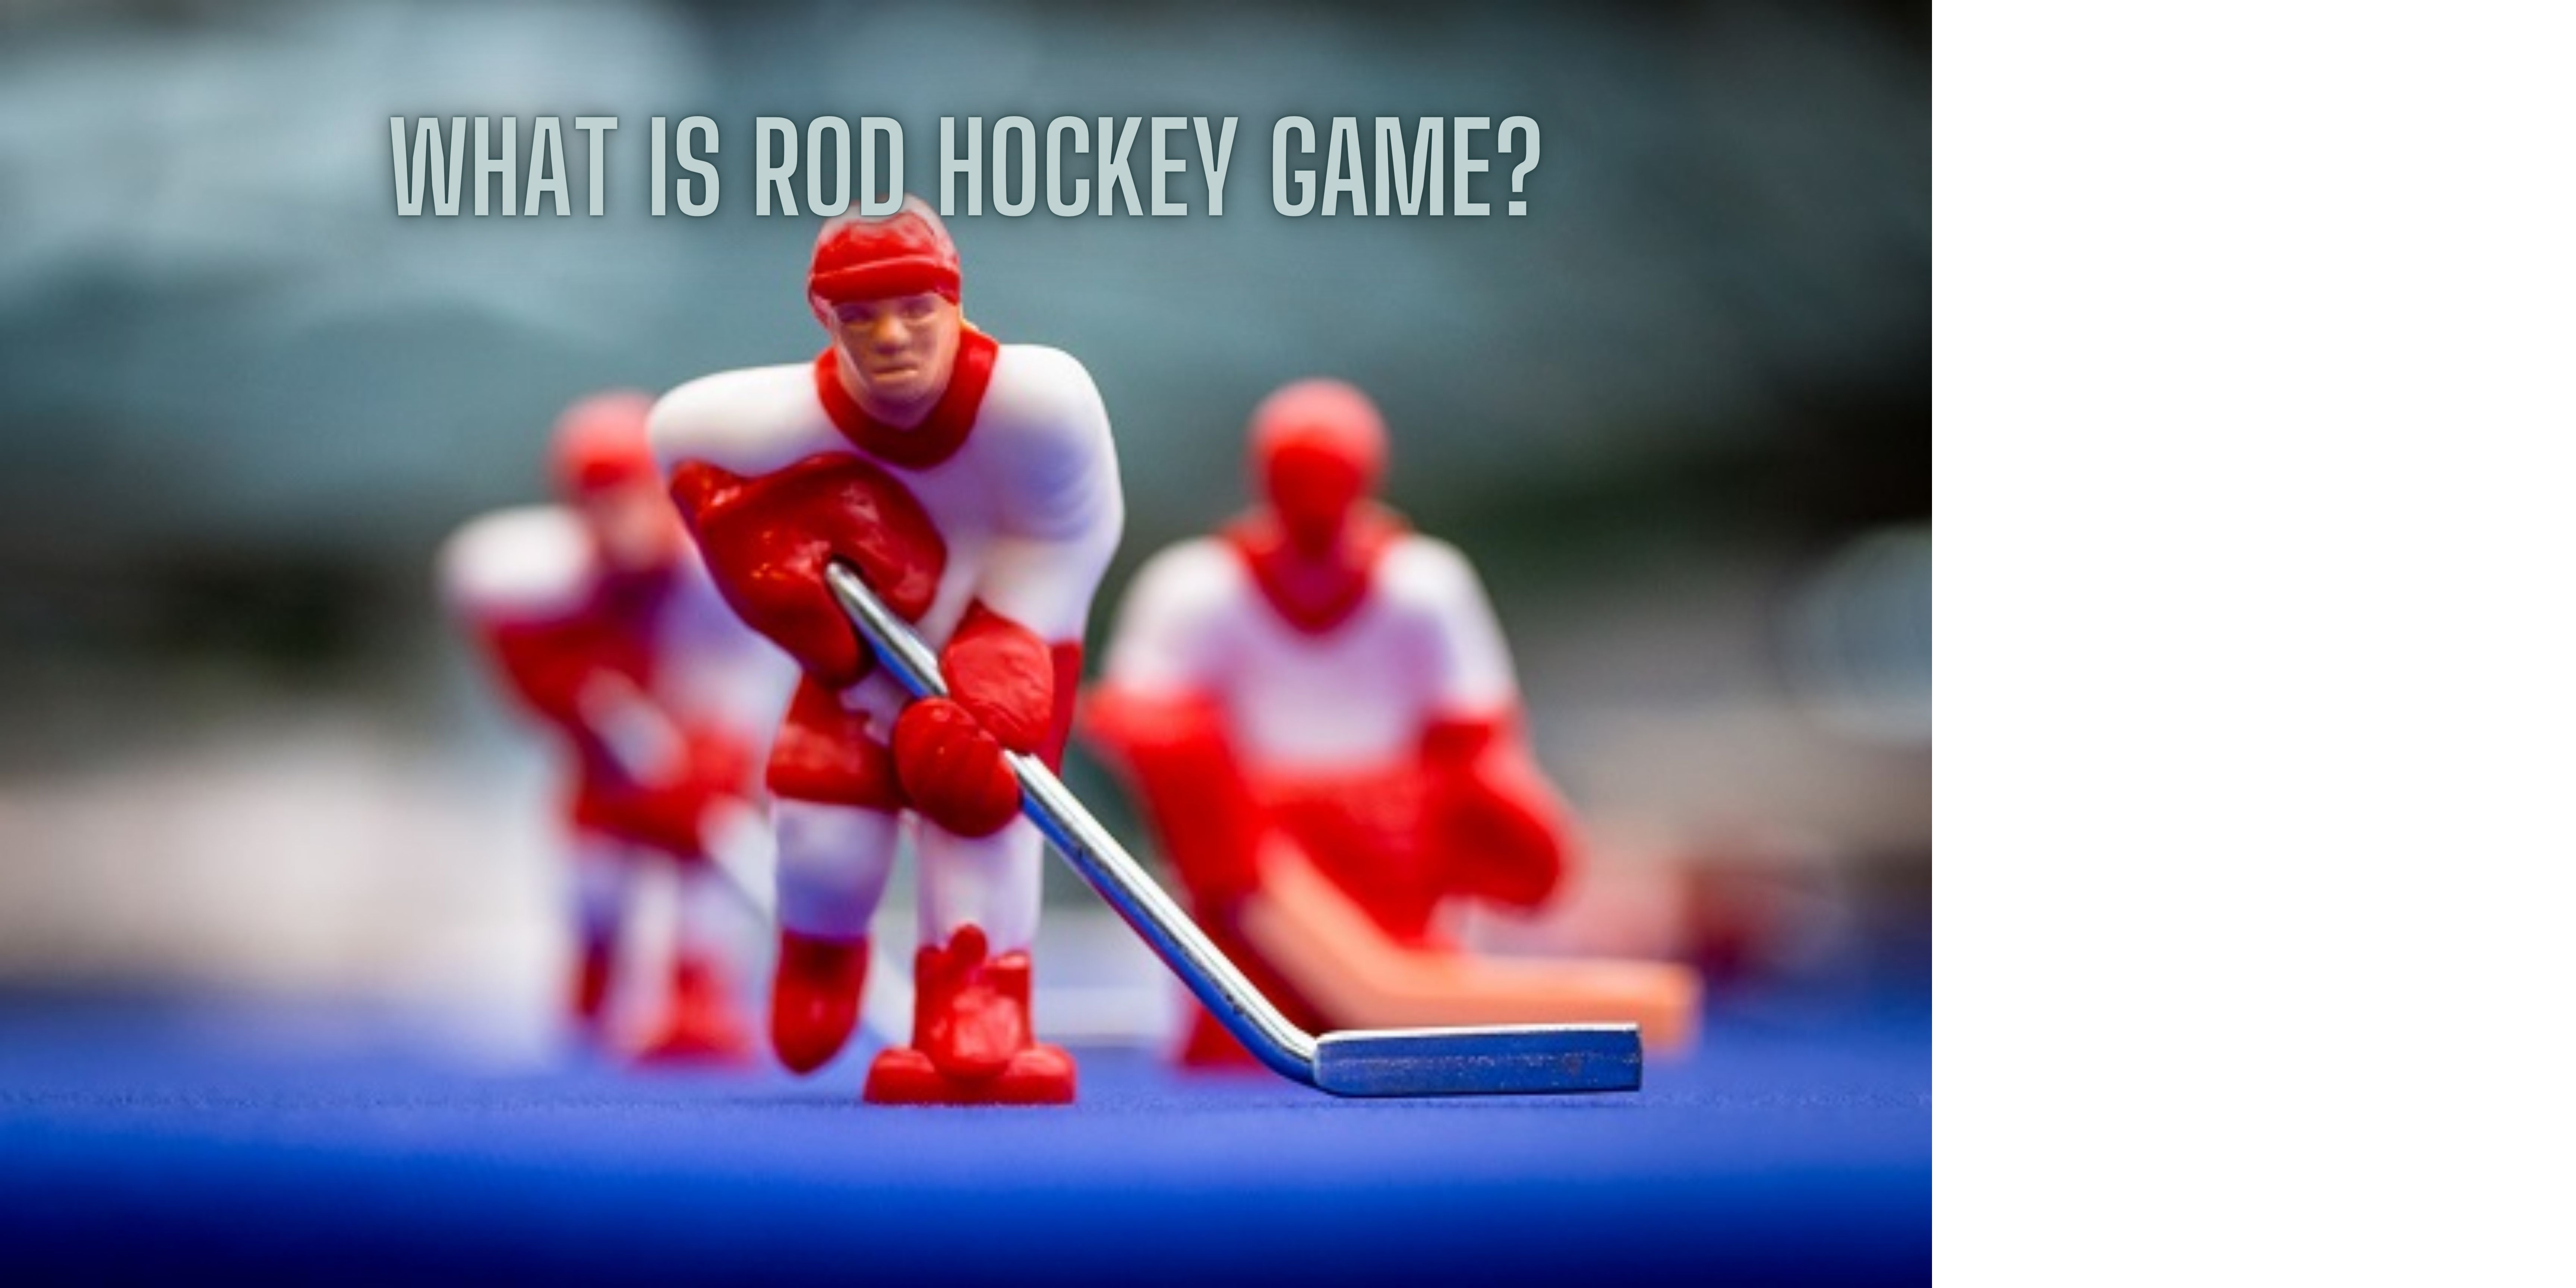 What Is Rod Hockey Game?